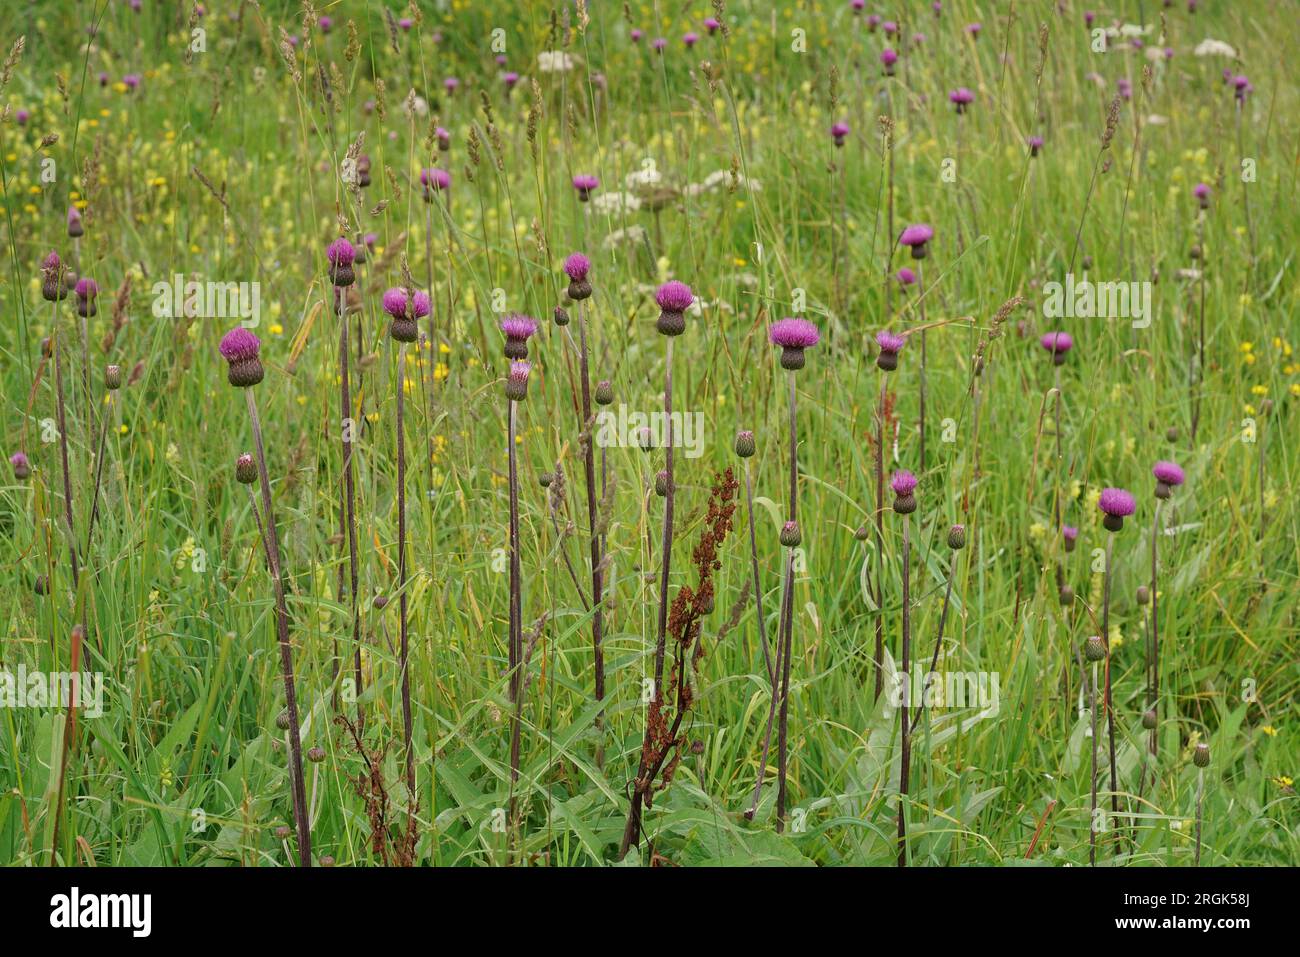 Natural Closeup on an aggregation of colorful purple flowering melancholy thistle flowers, Cirsium heterophyllum Stock Photo